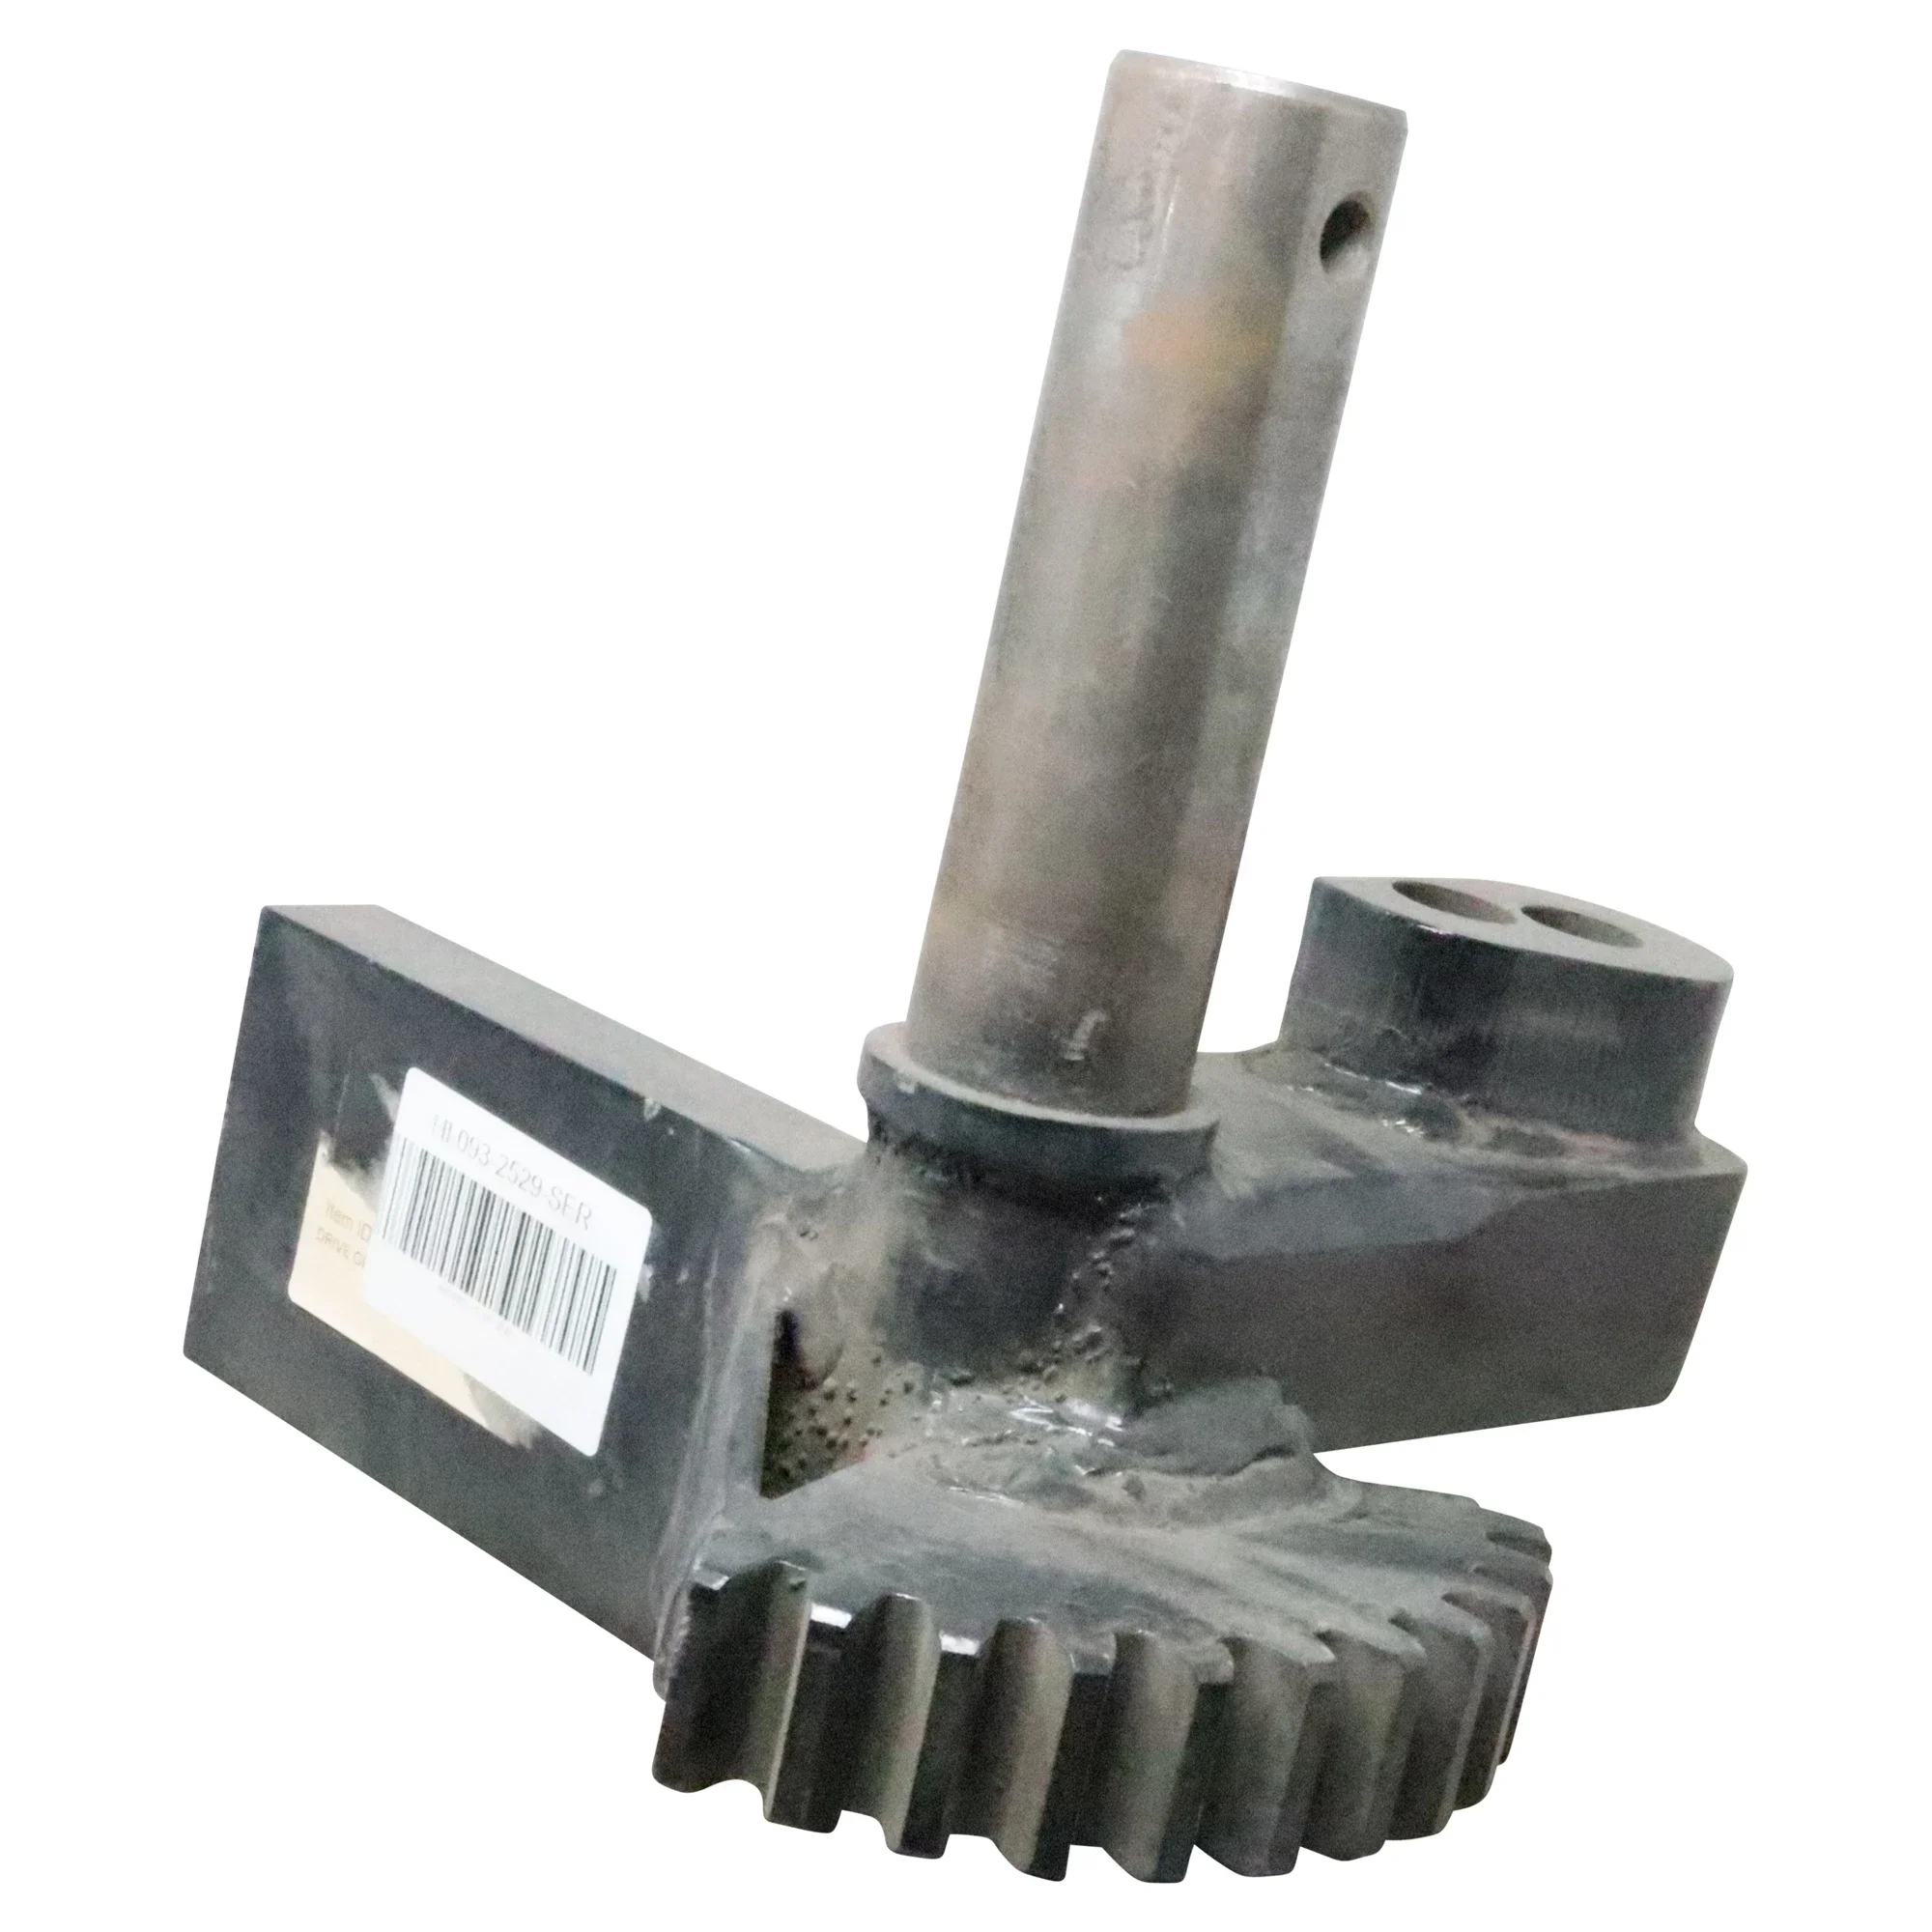 Wastebuilt® Replacement for Heil Drive Gear Universal